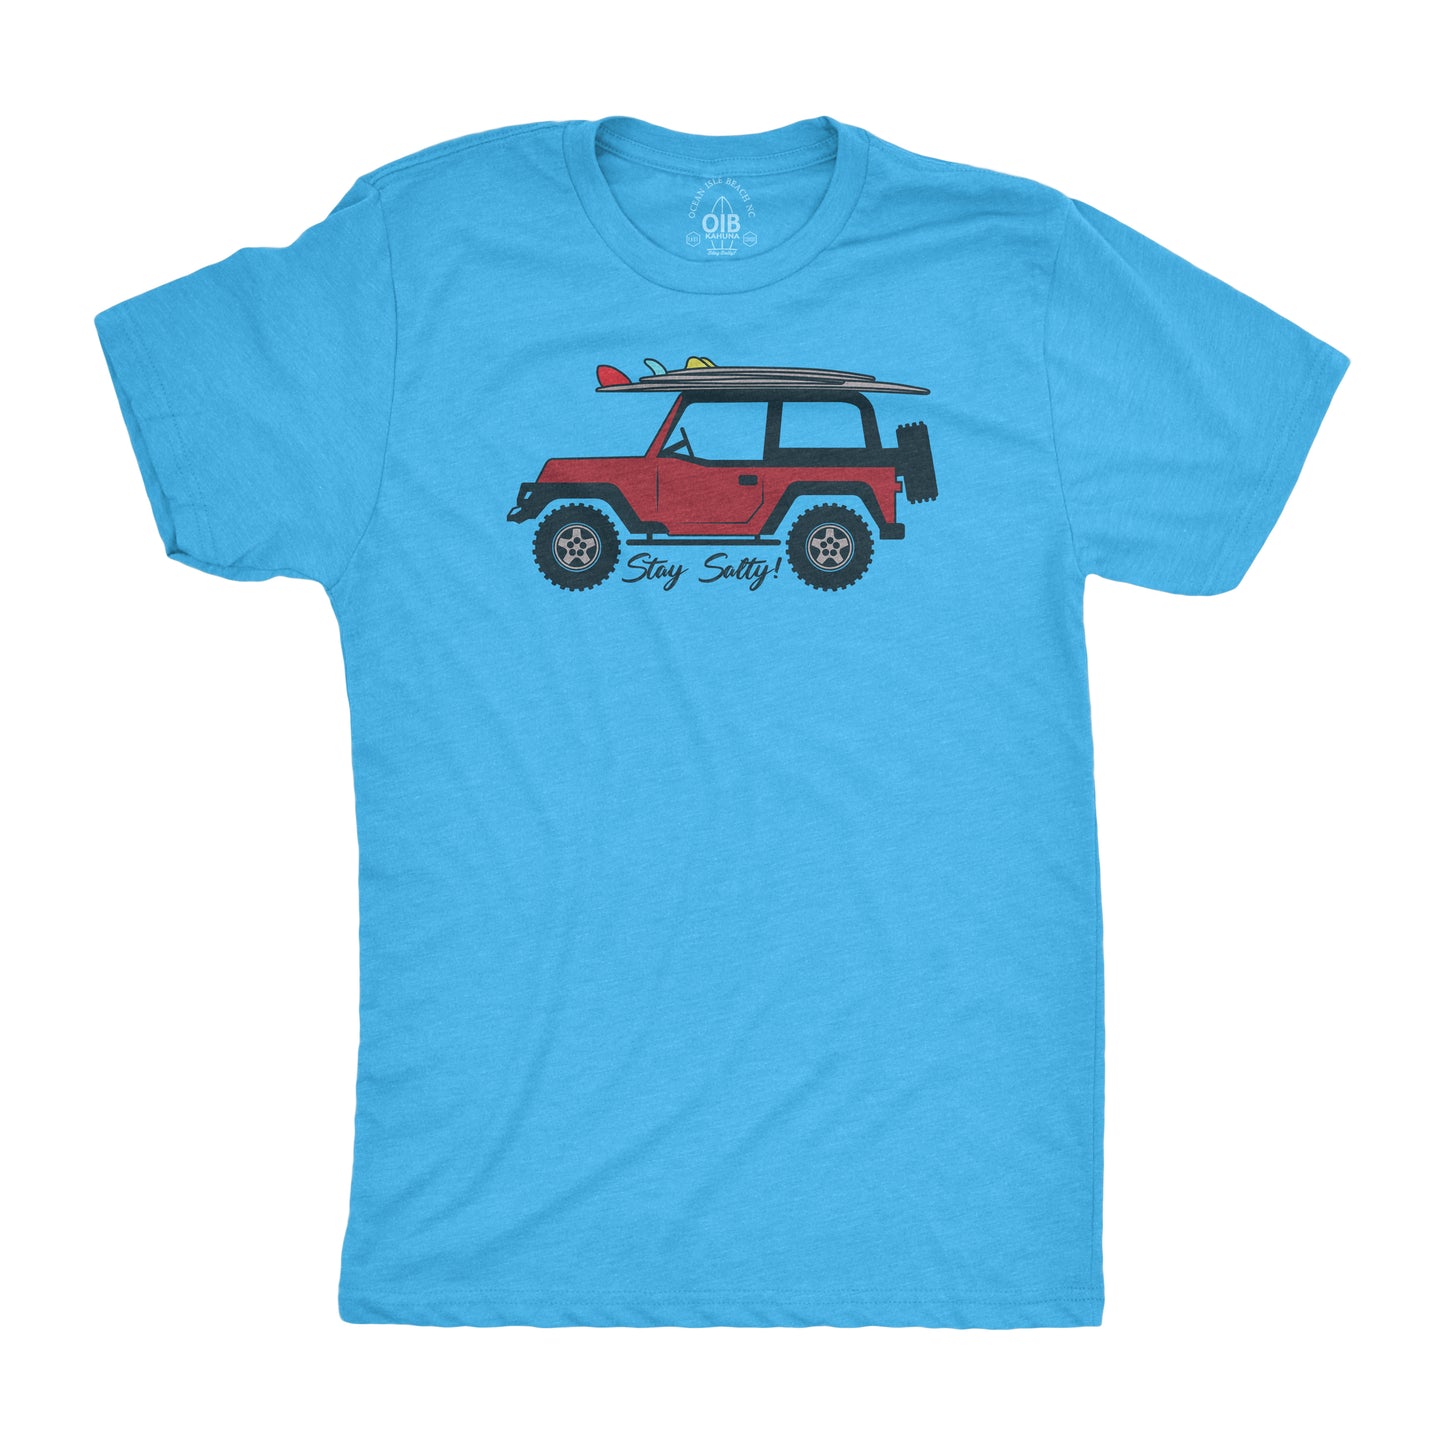 KIDS / YOUTH "Stay Salty!" Surf Jeep Tee